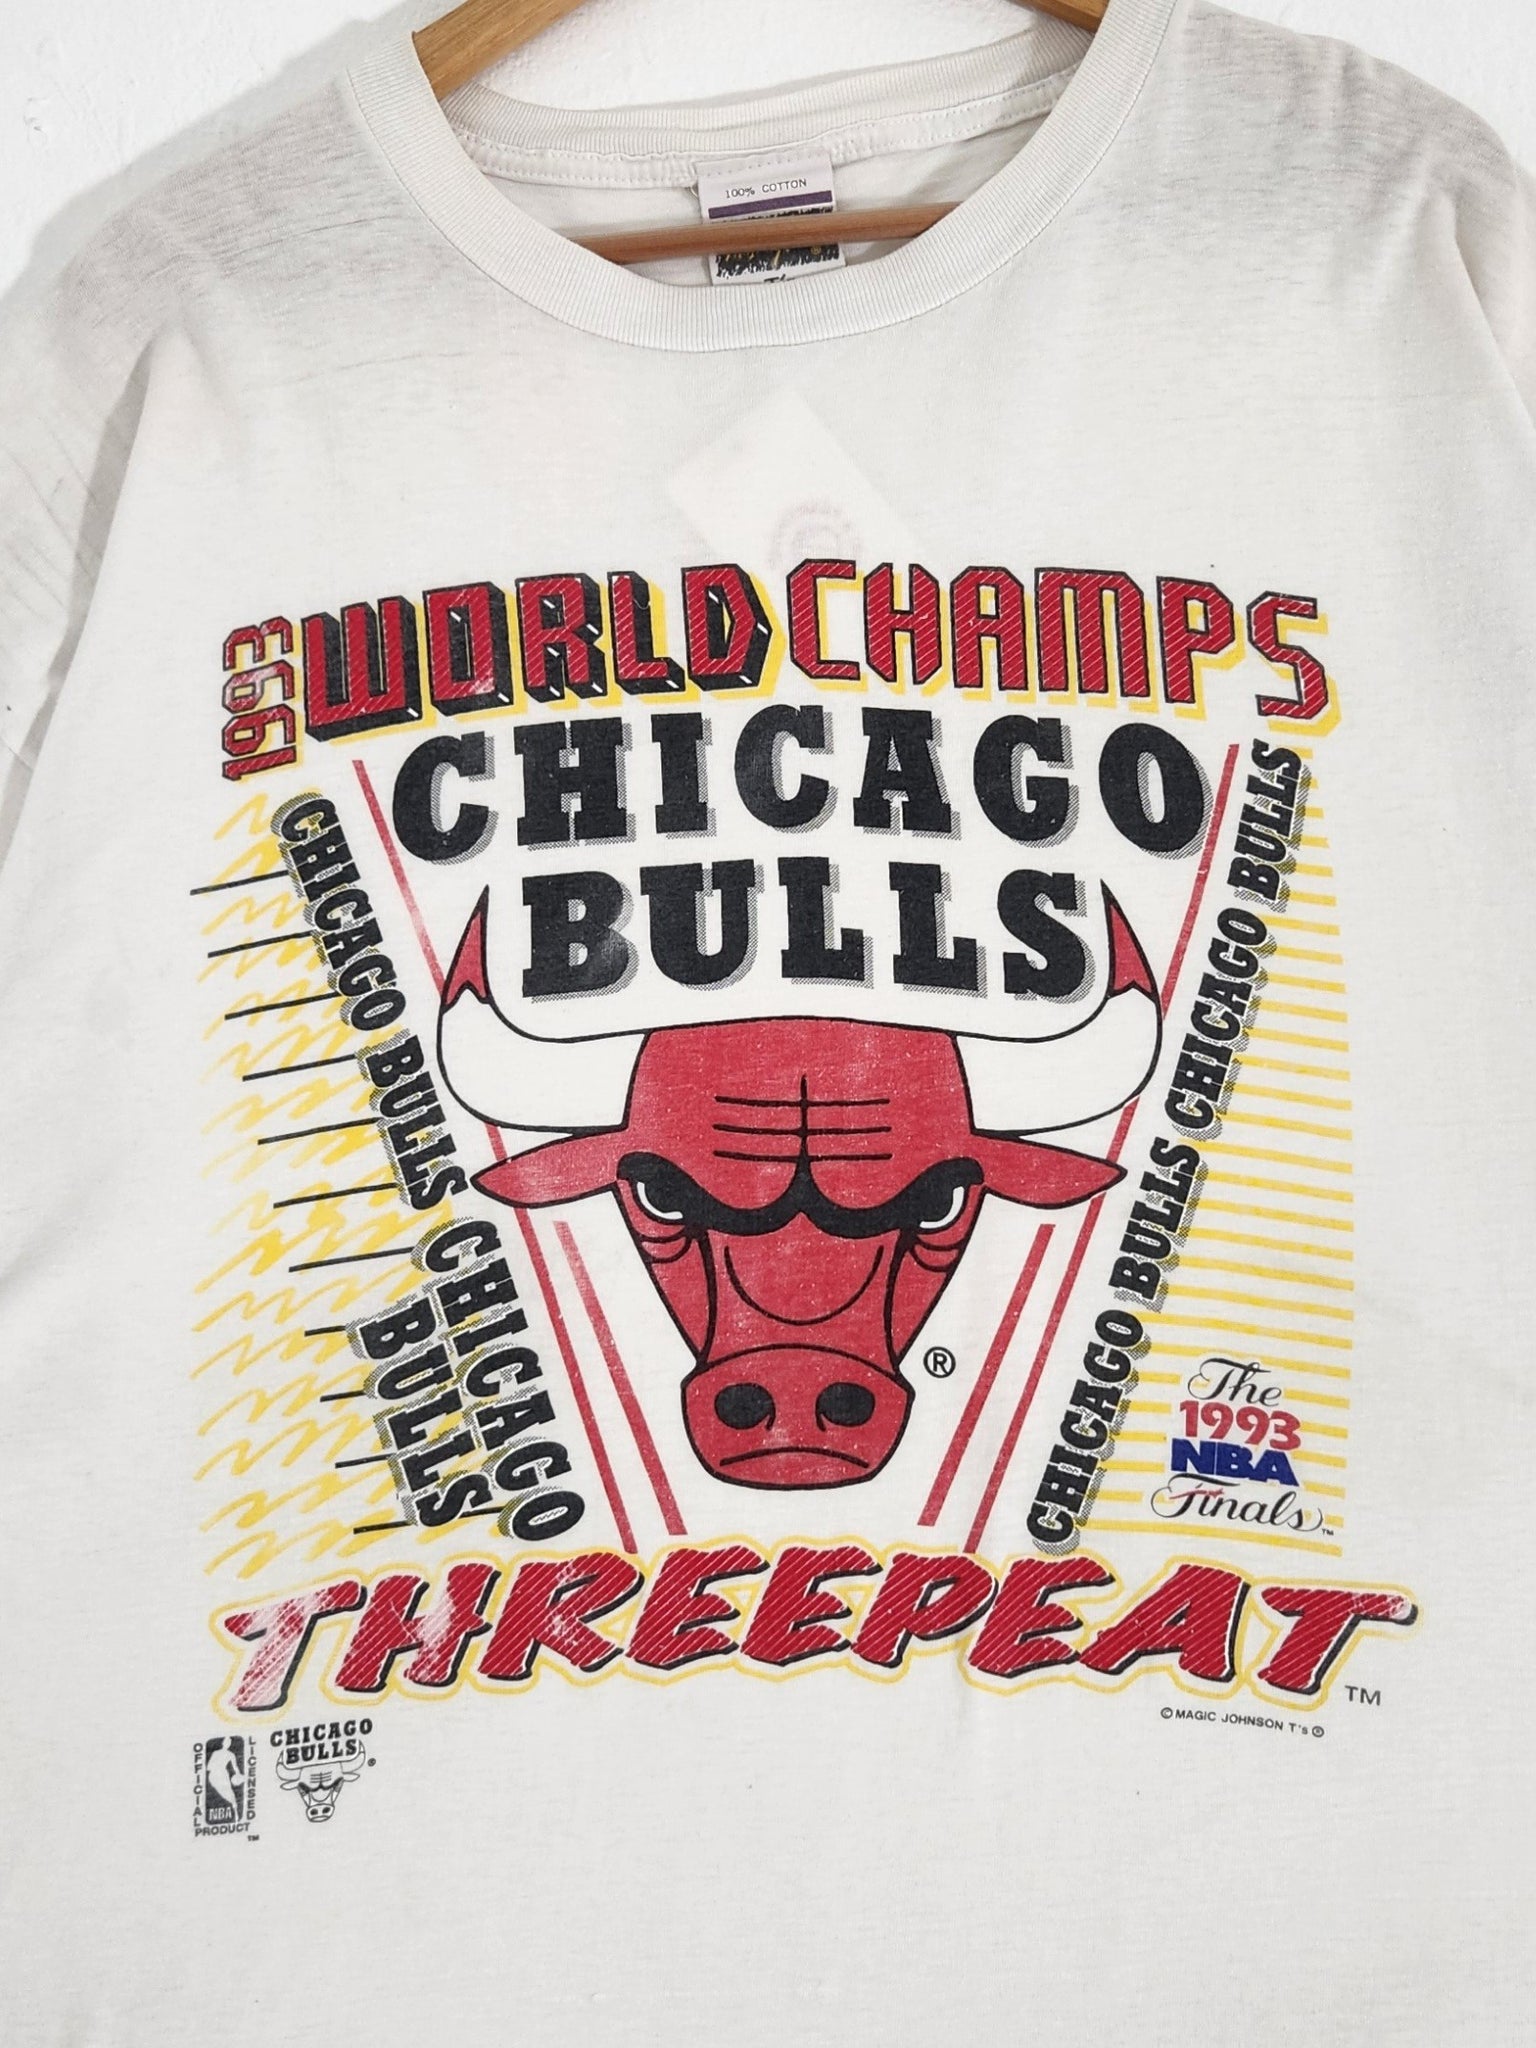 VTG 90s 1993 NBA Finals Chicago Bulls 3 Peat Champions Champs T Shirt Red  large